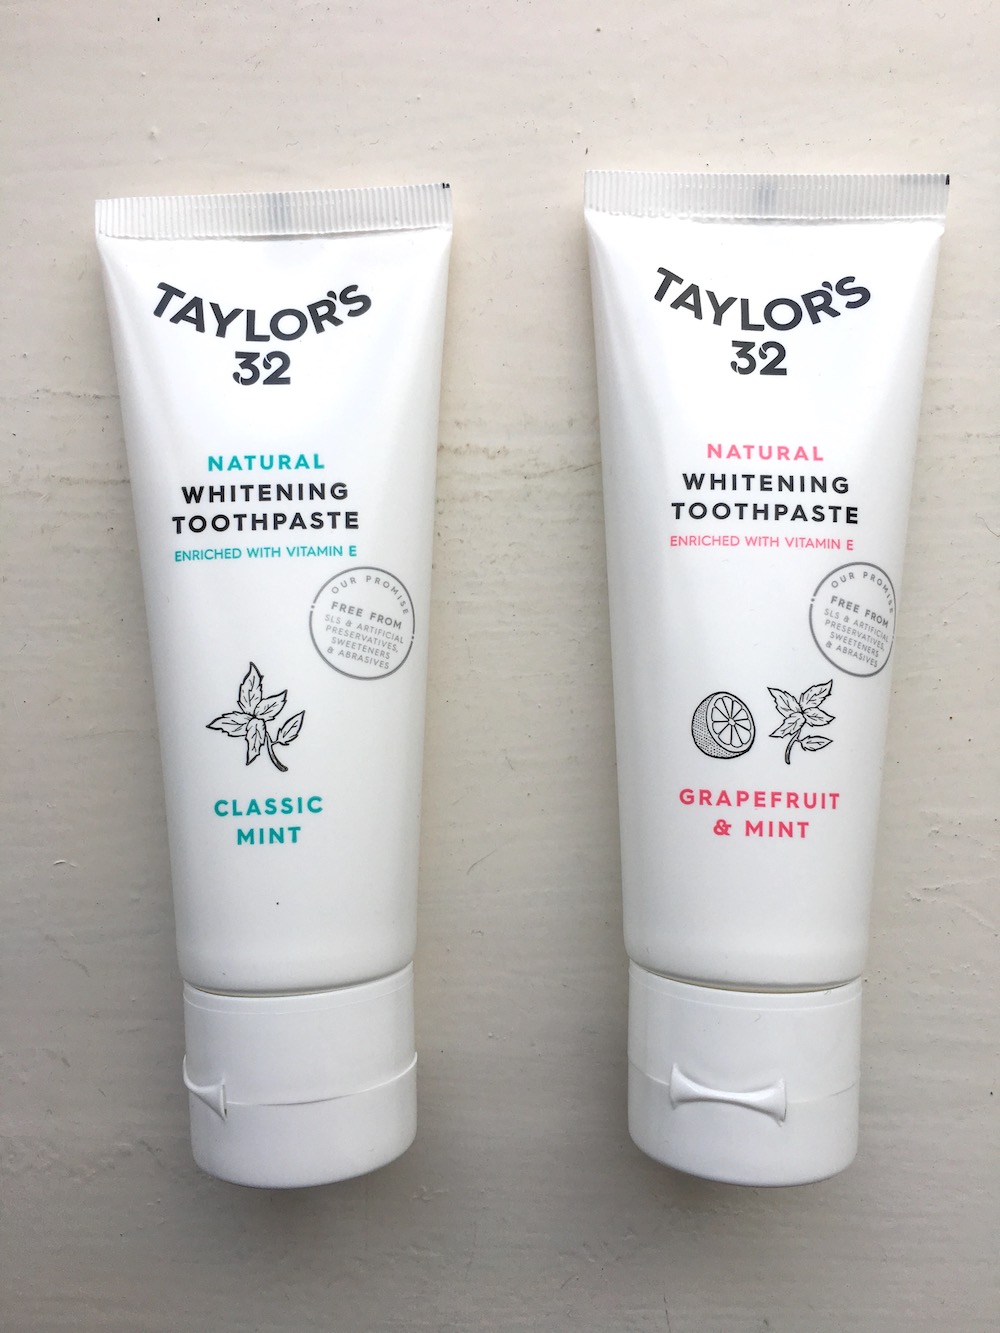 Taylor's 32 whitening toothpaste classic mint and grapefruit and mint